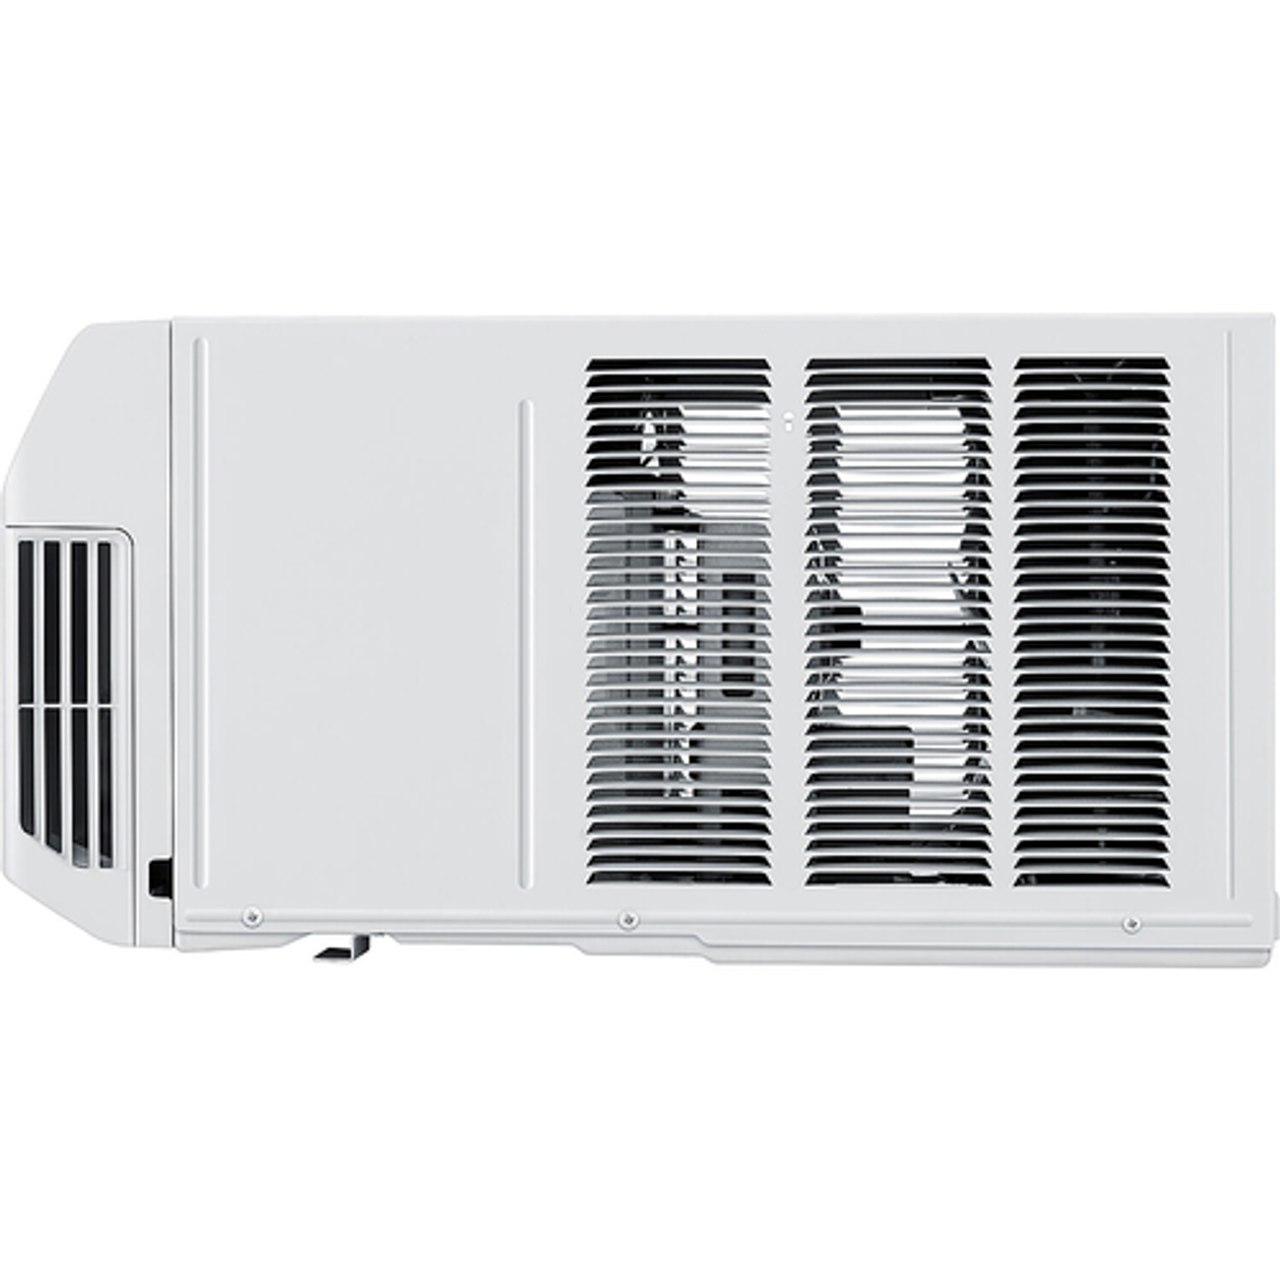 LG - 8,500 BTU High Efficiency Dual Inverter Window Air Conditioner with Wi-Fi and LCD Remote, 115V - White